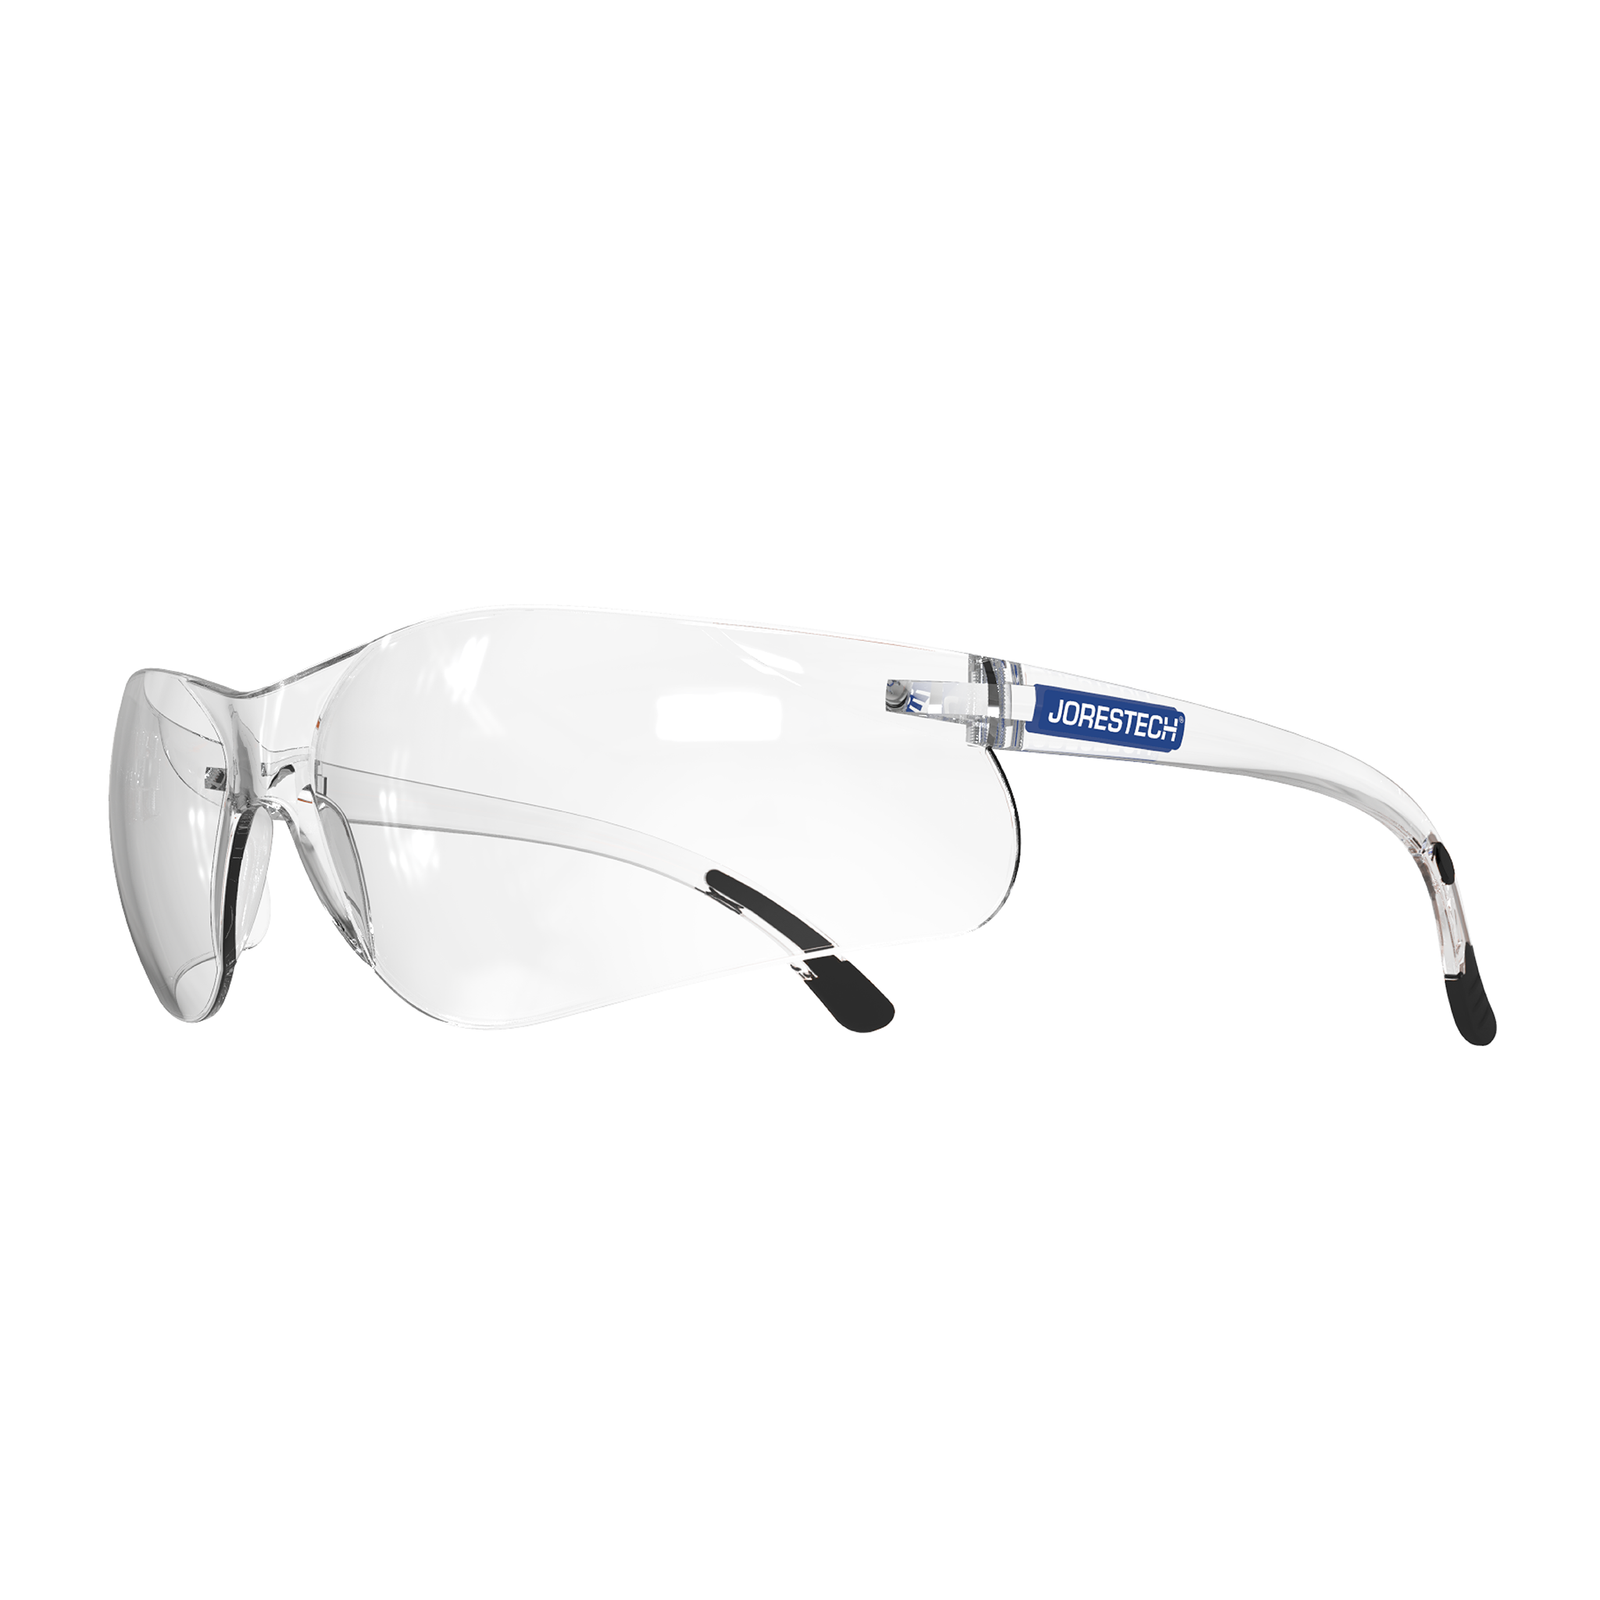 Diagonal view of the clear JORESTECH wraparound safety glasses for high impact protection with black rubberized temple tips. 